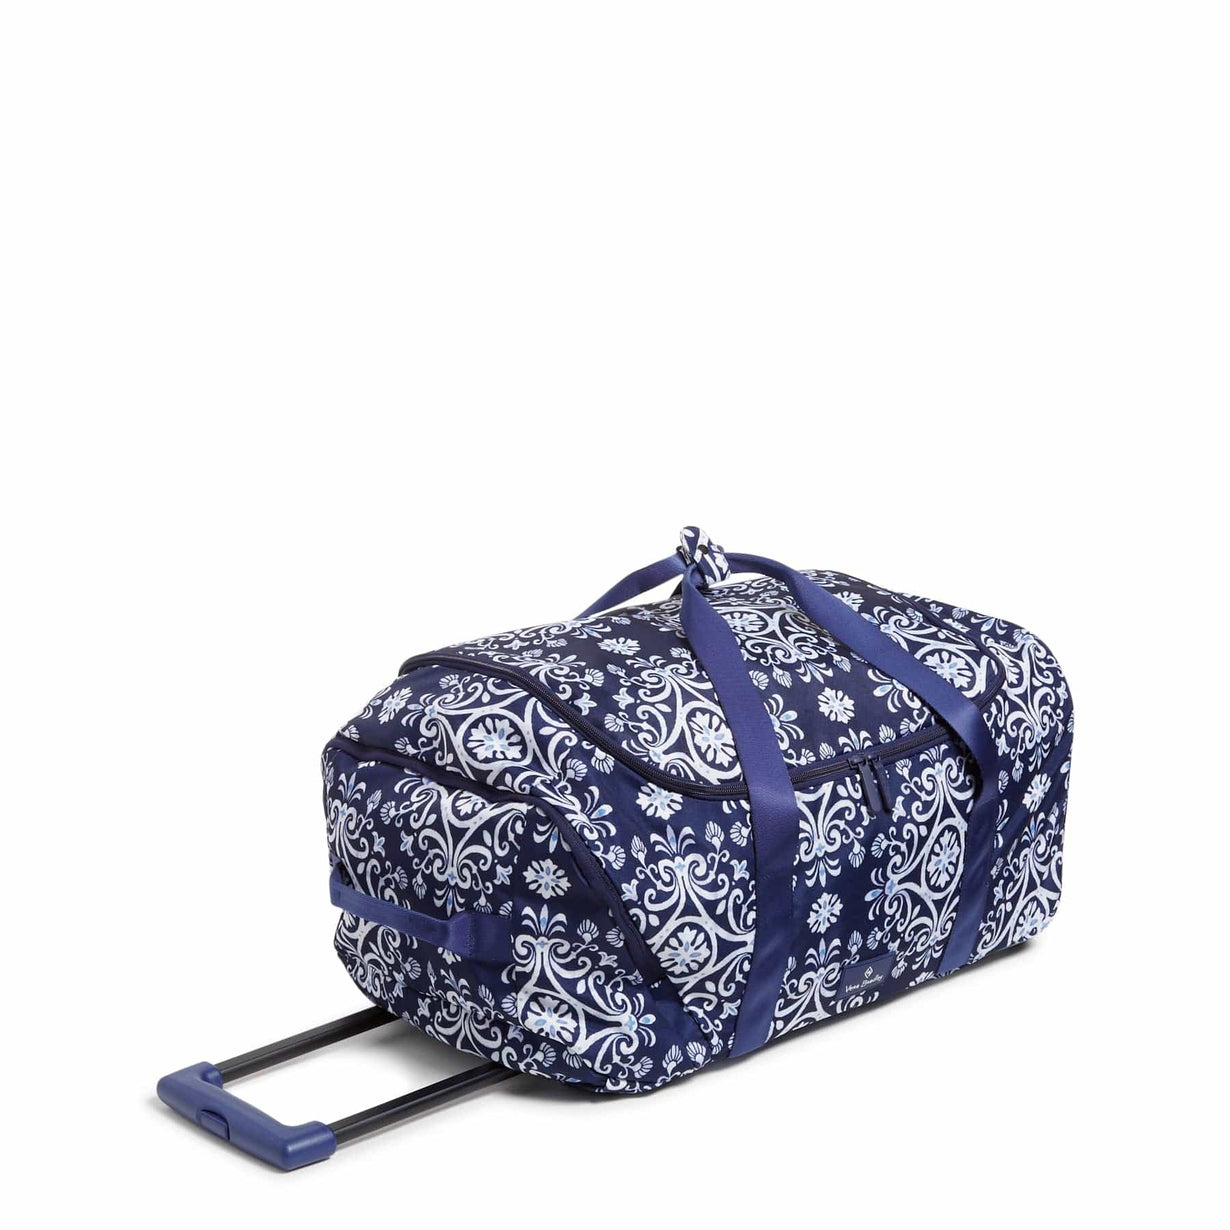 Vera Bradley Outlet | Wheeled Carry-On – Vera Bradley Outlet Store